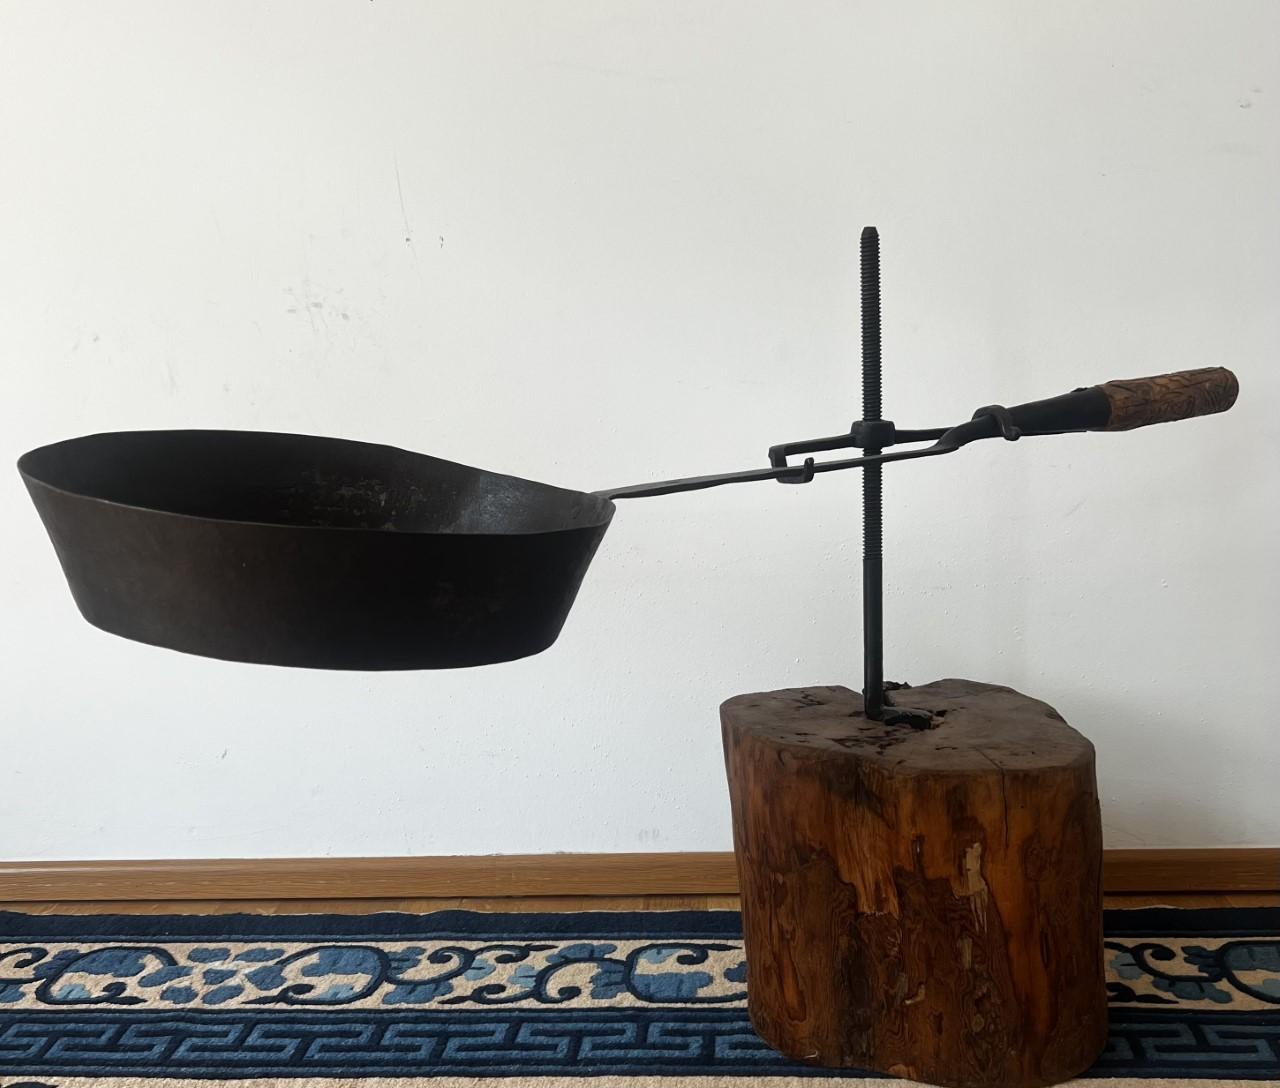 Fantastic antique American Pioneer cooking Pan, truly an absolutely unique Museums Piece!
Total weight is ca 15 kg, the Pan itself is made out of iron and sits on a solid wooden stump.
The only manufactured items American settlers kept the entire